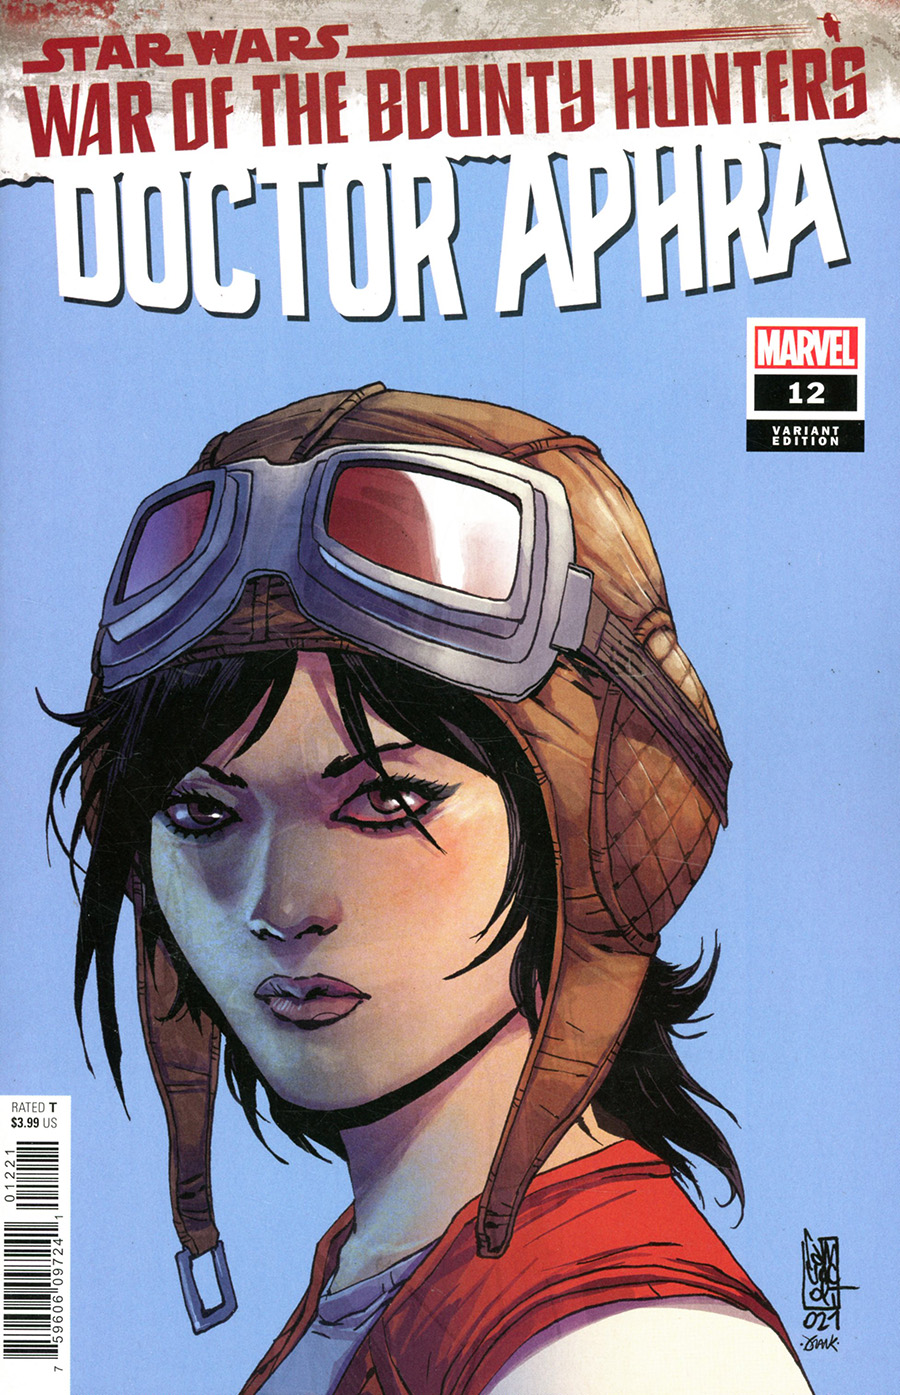 Star Wars Doctor Aphra Vol 2 #12 Cover B Variant Giuseppe Camuncoli Headshot Cover (War Of The Bounty Hunters Tie-In)